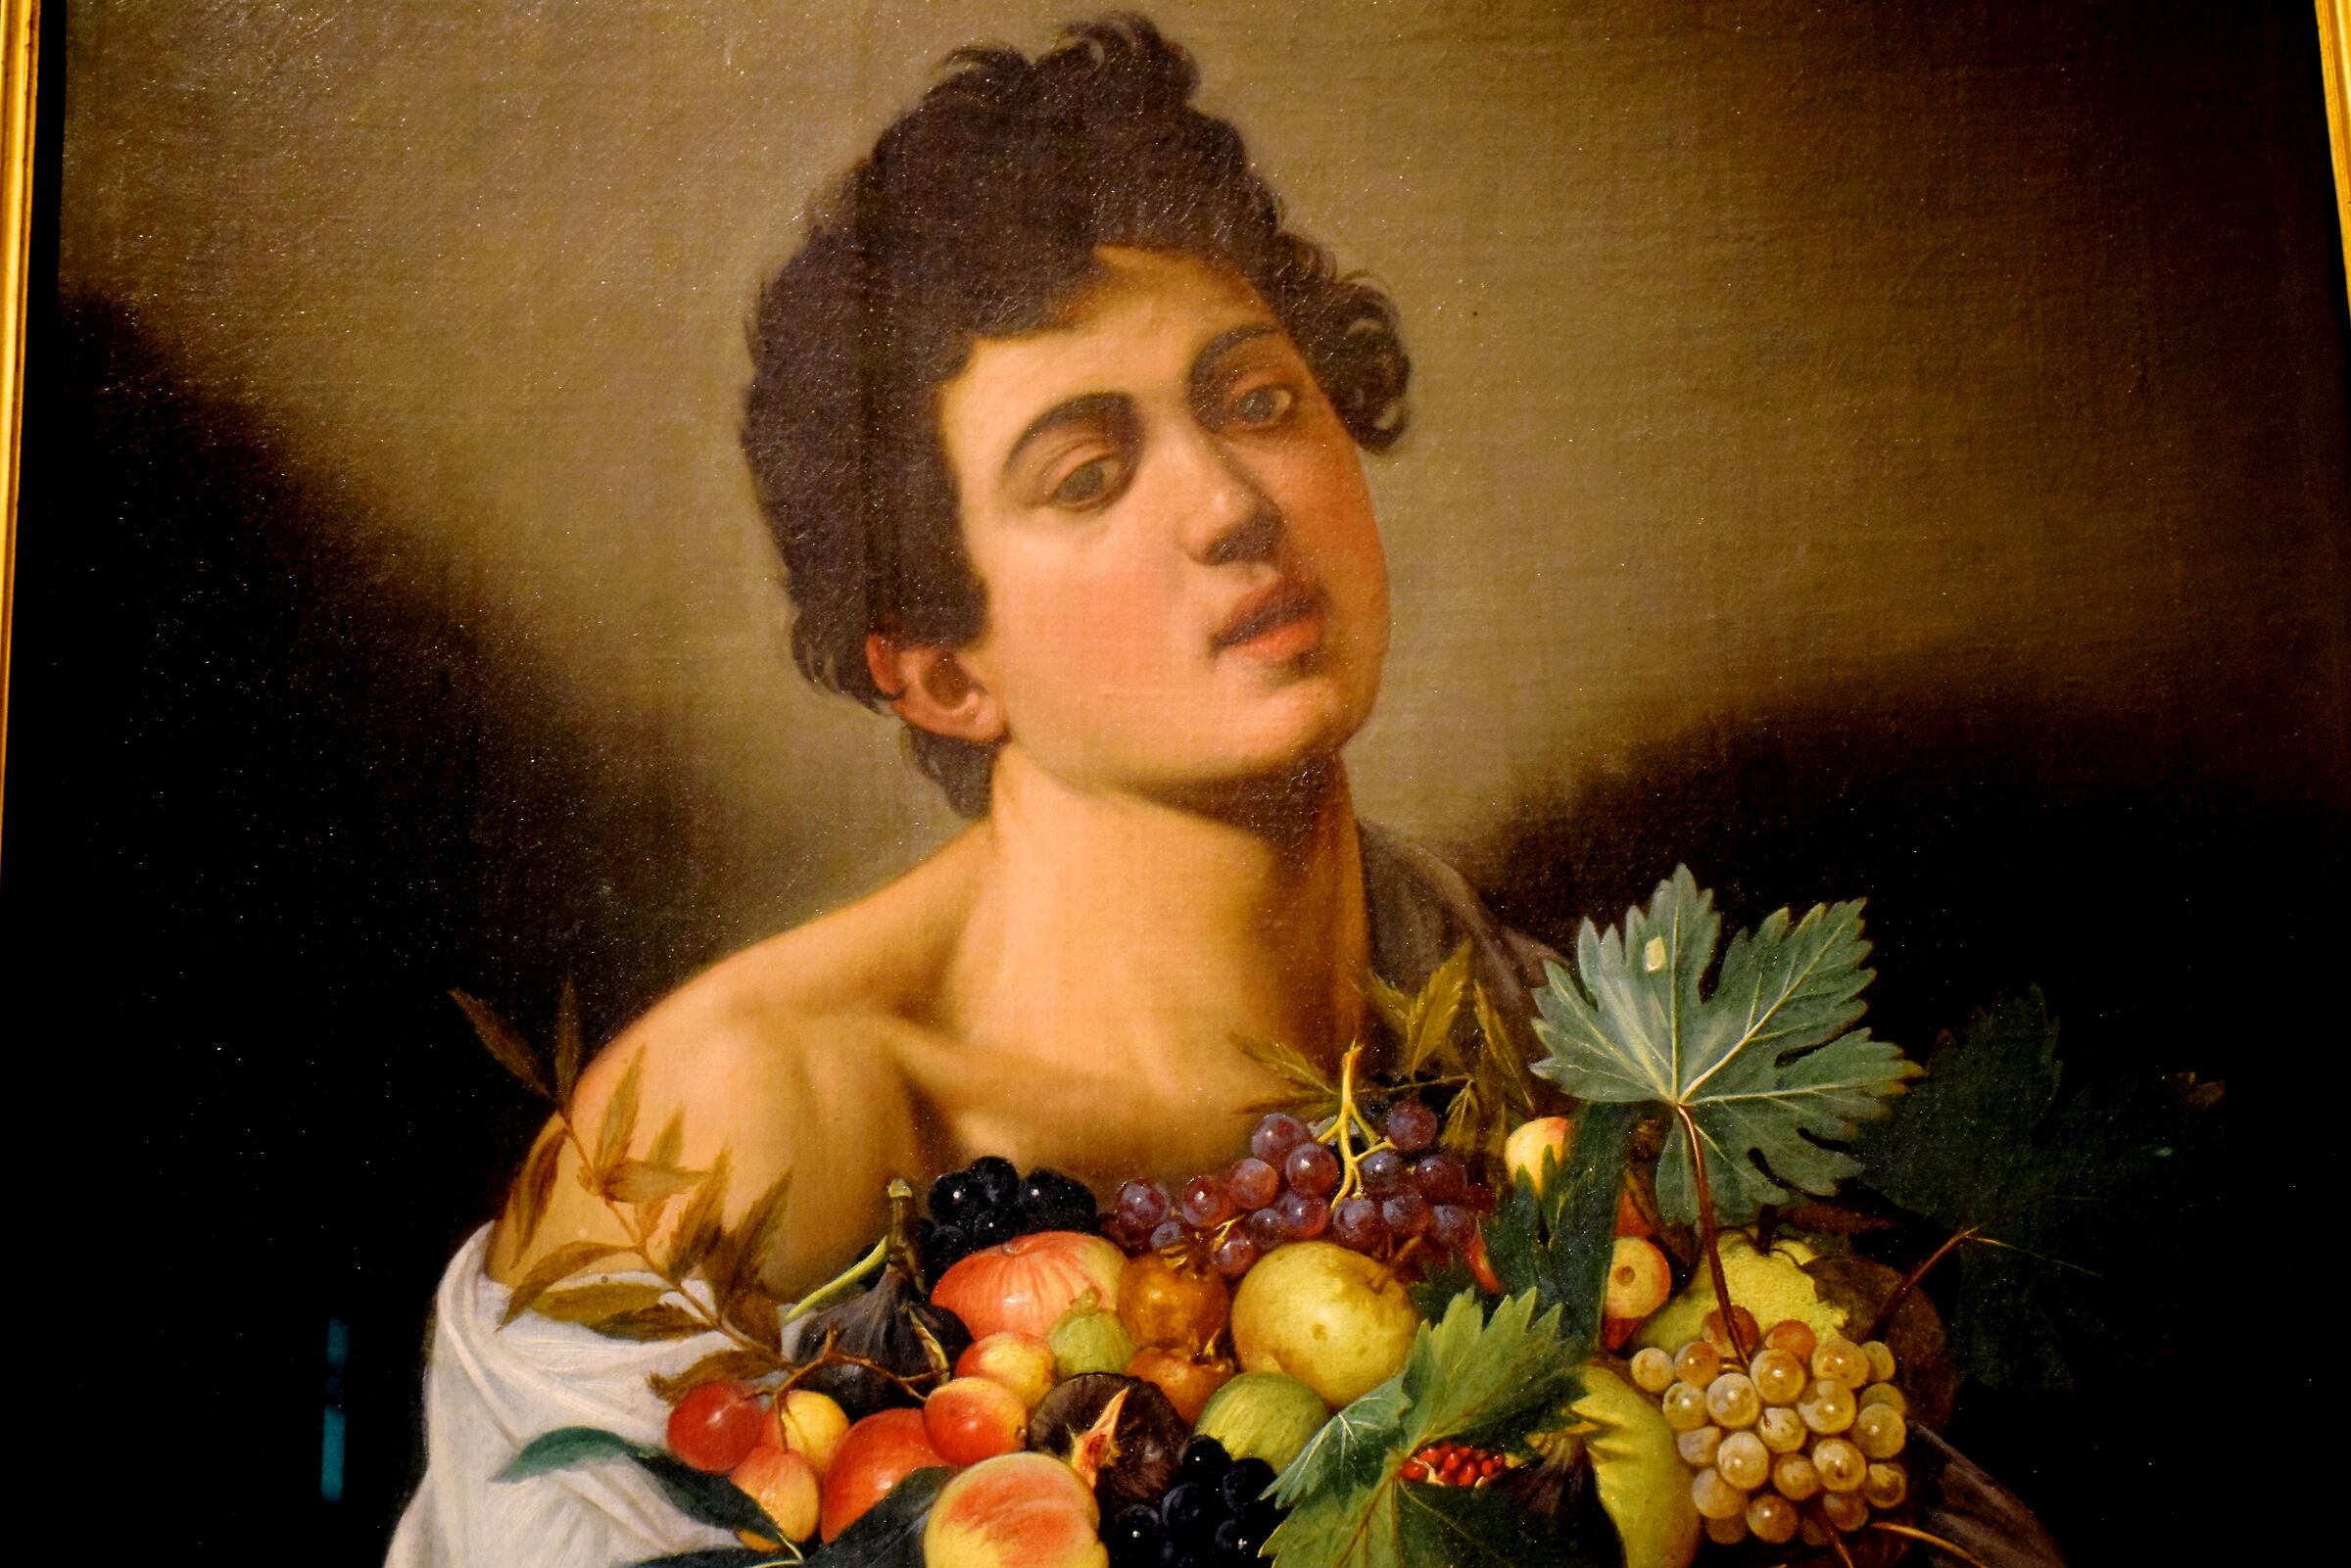 Caravaggio "Young with fruit basket"...